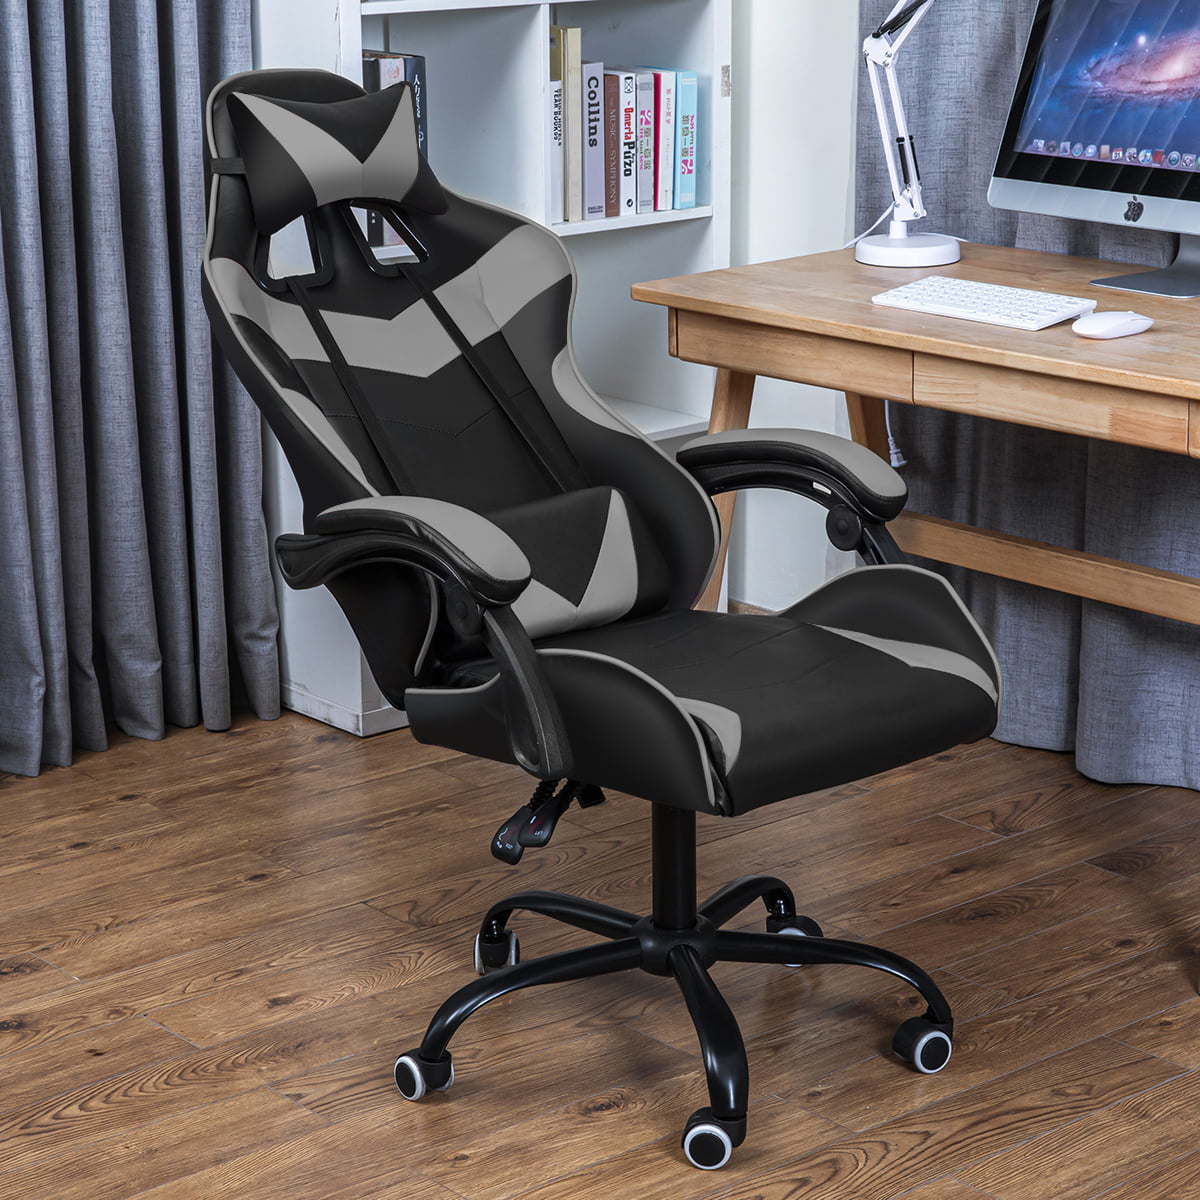 Luxury Racing Gaming Chair Executive PC Office Desk Chairs Lift Swivel Recliner 